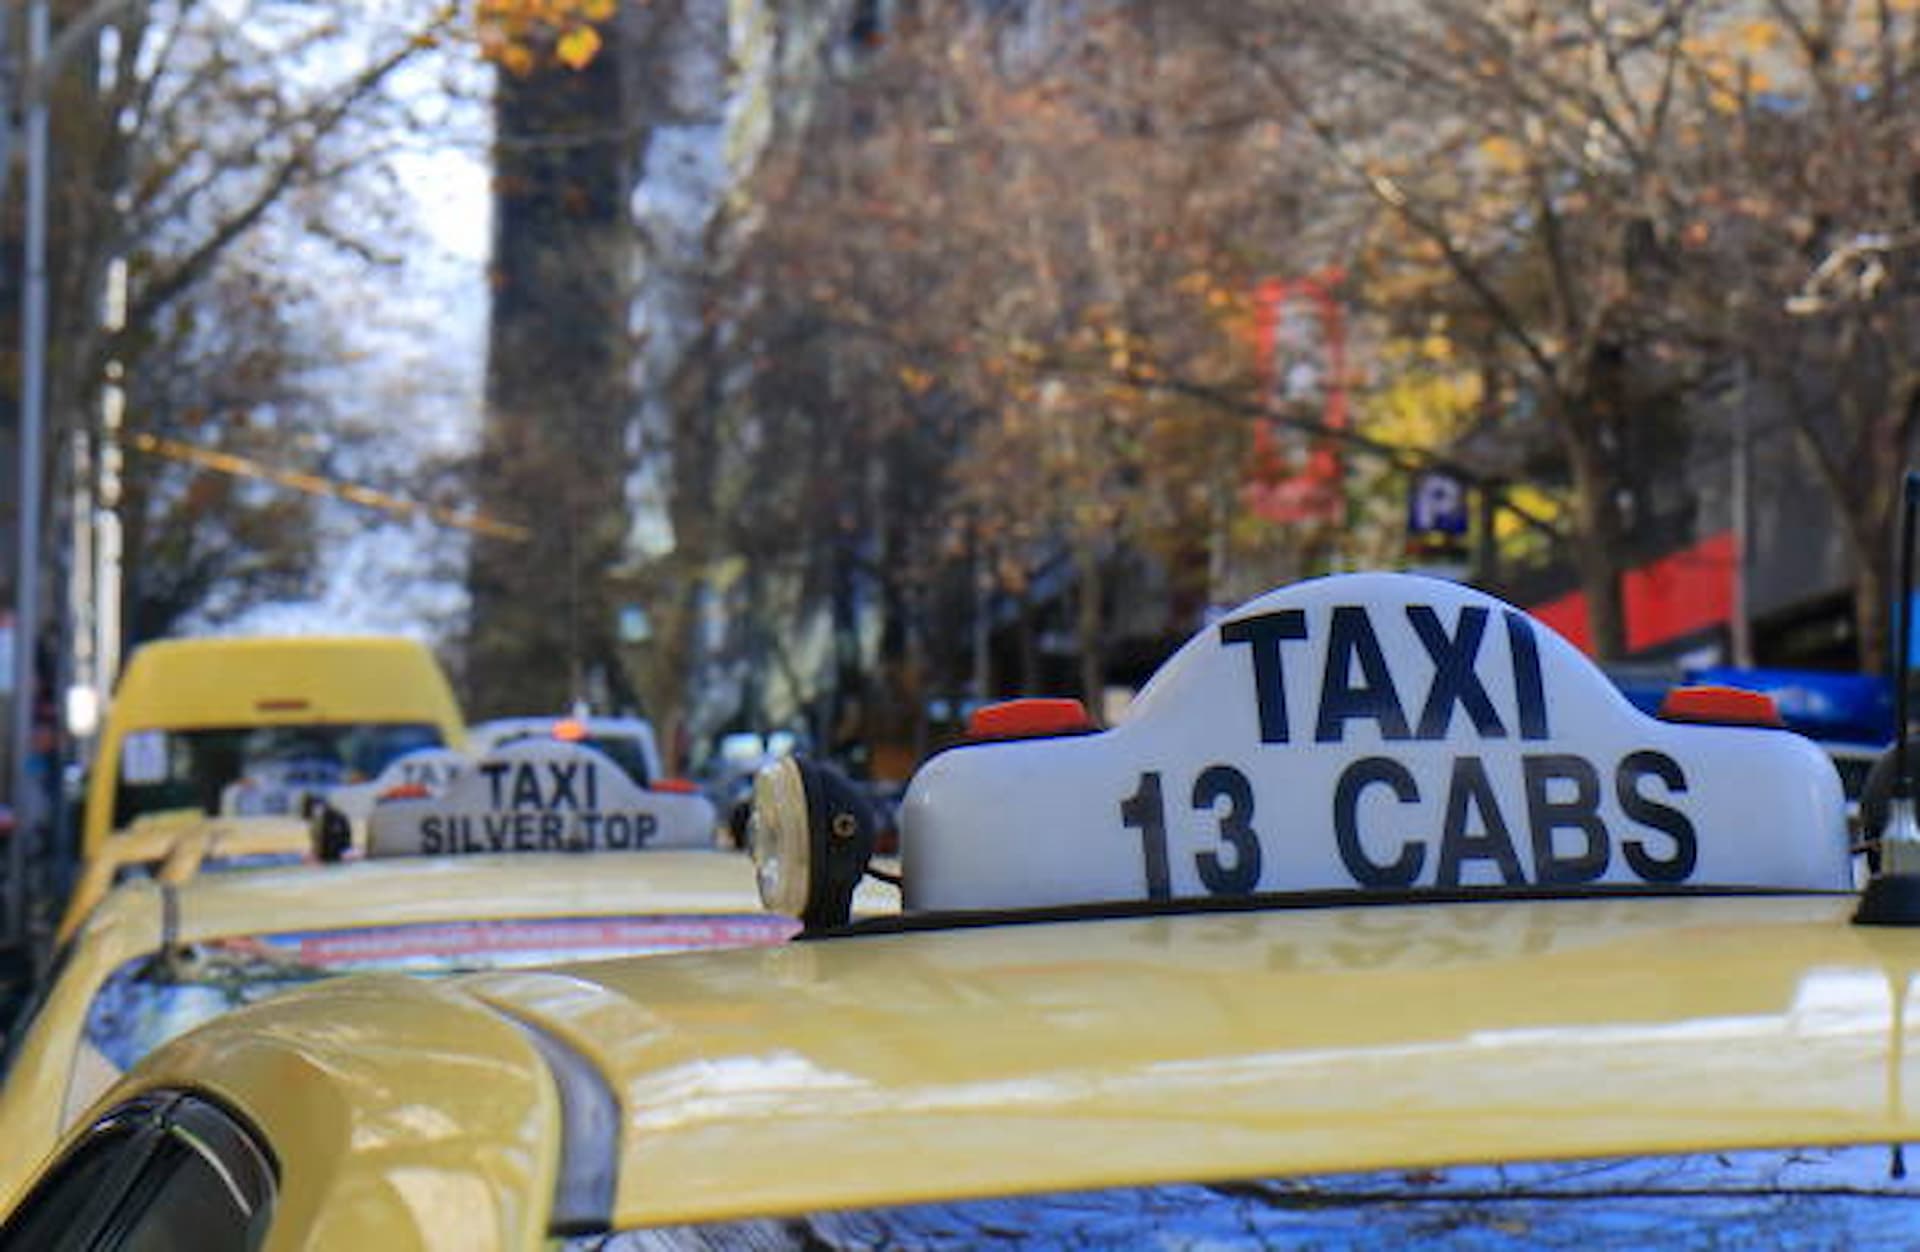 Taxis: The Safest And Most Convenient Way To Get Around The City